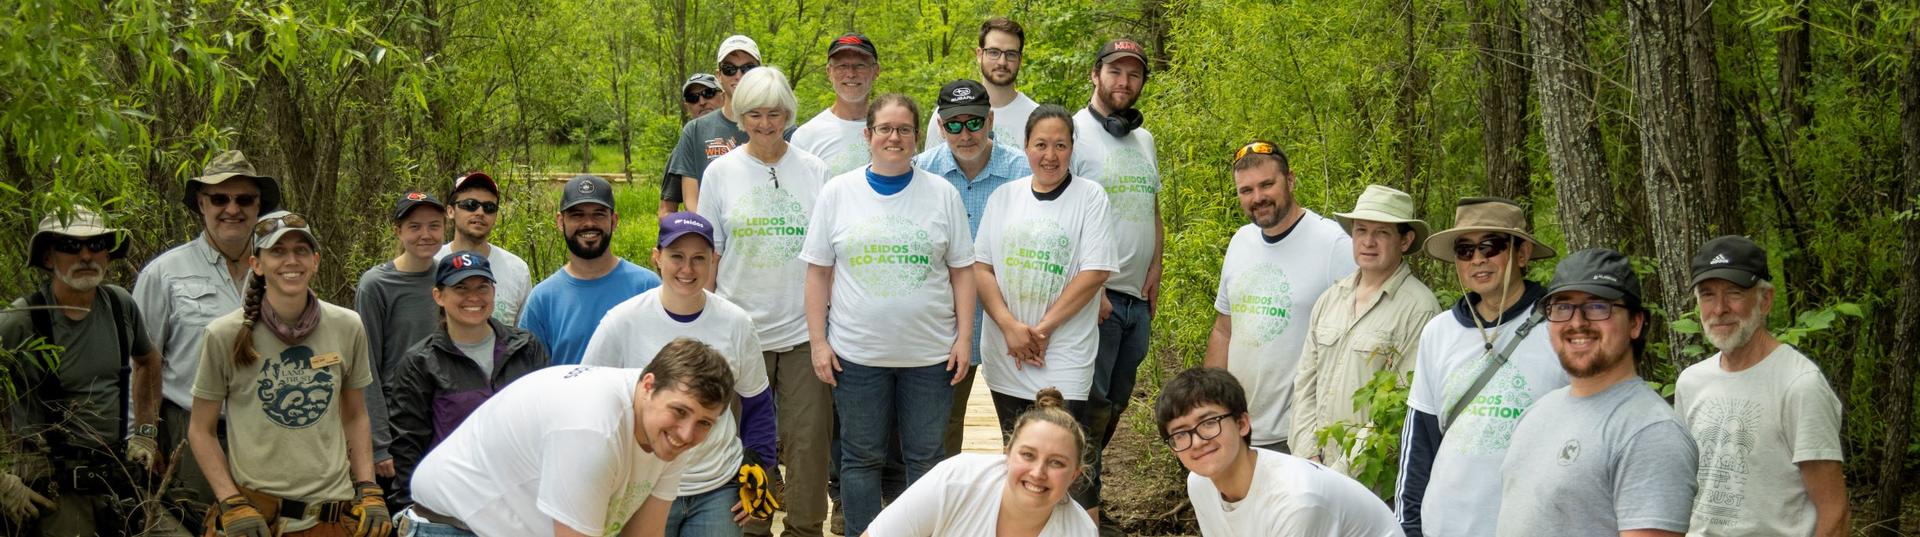 Leidos employees building a boardwalk for access to a nature preserve.